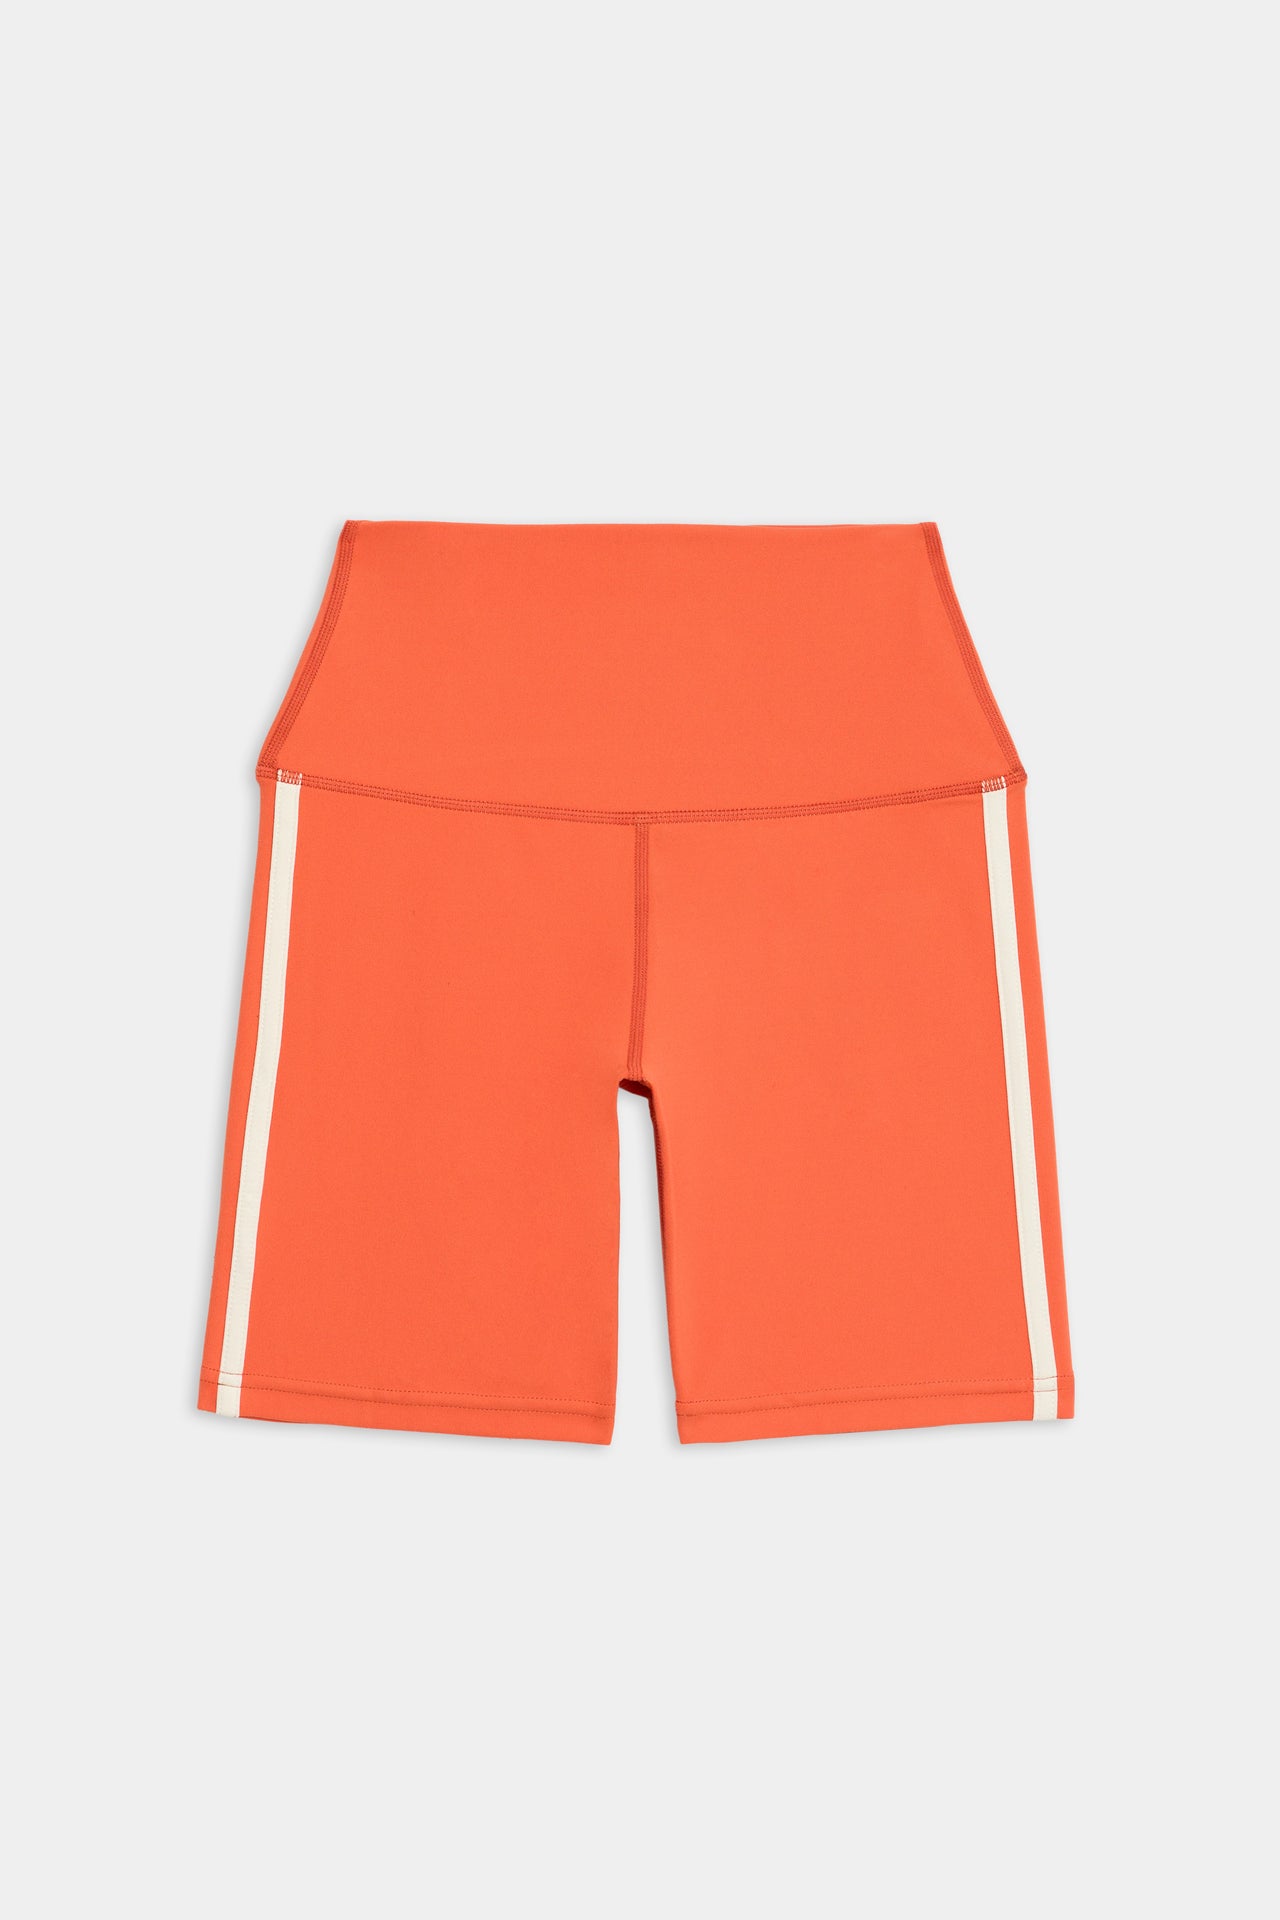 Flat view of orange bike shorts with two thin white stripes down the side